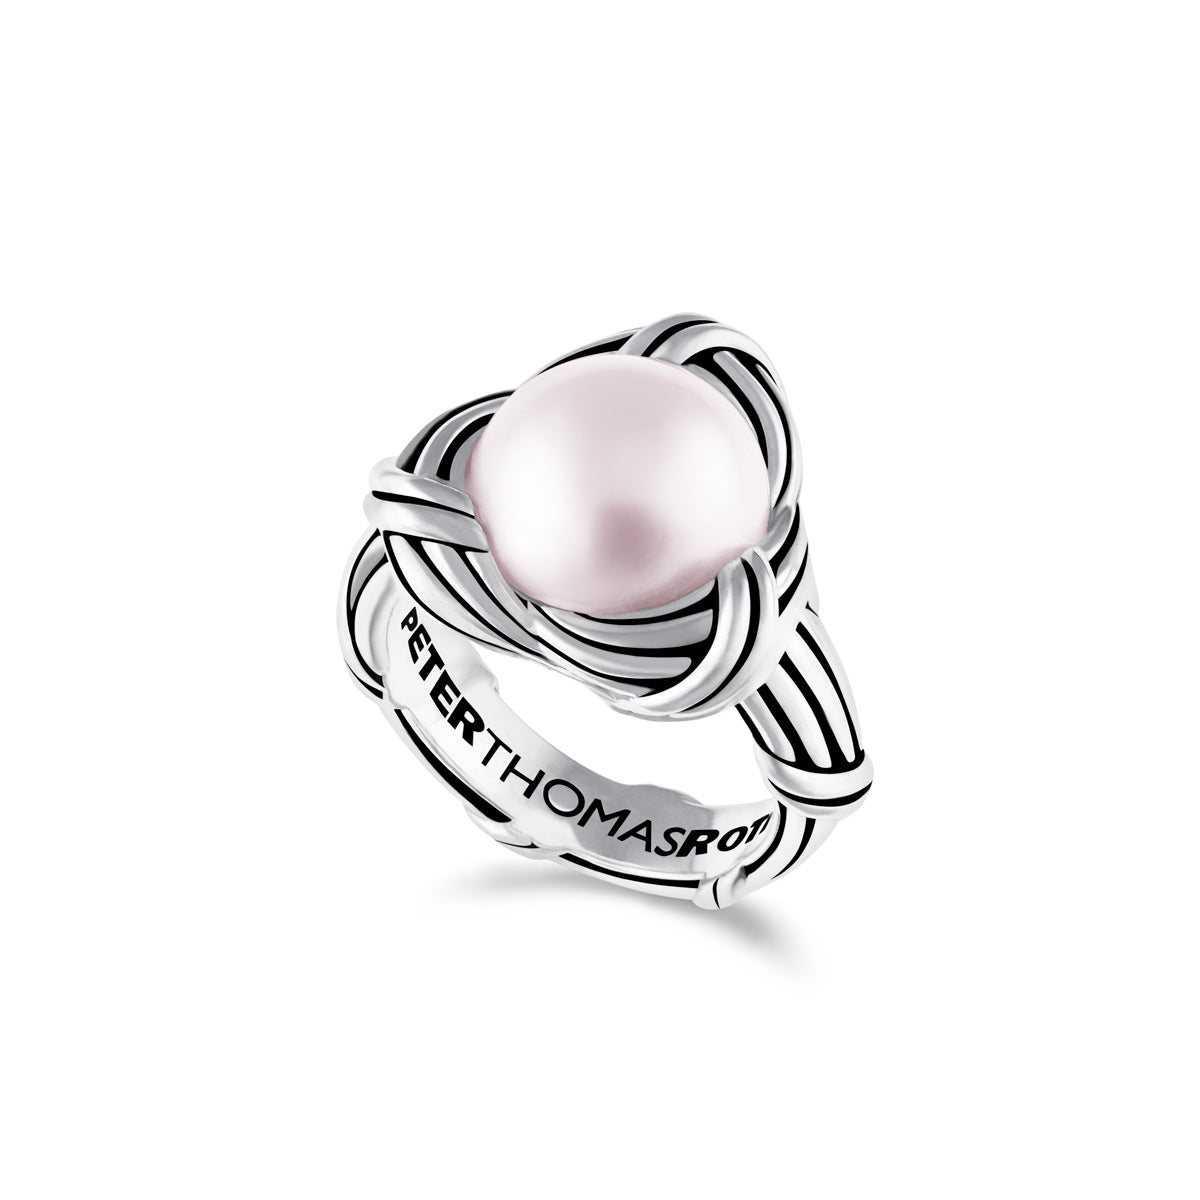 Creatie Afstudeeralbum tyfoon Peter Thomas Roth Ribbon and Reed Love Knot Cocktail Ring in sterling  silver with pink pearl – Peter Thomas Roth Fine Jewelry